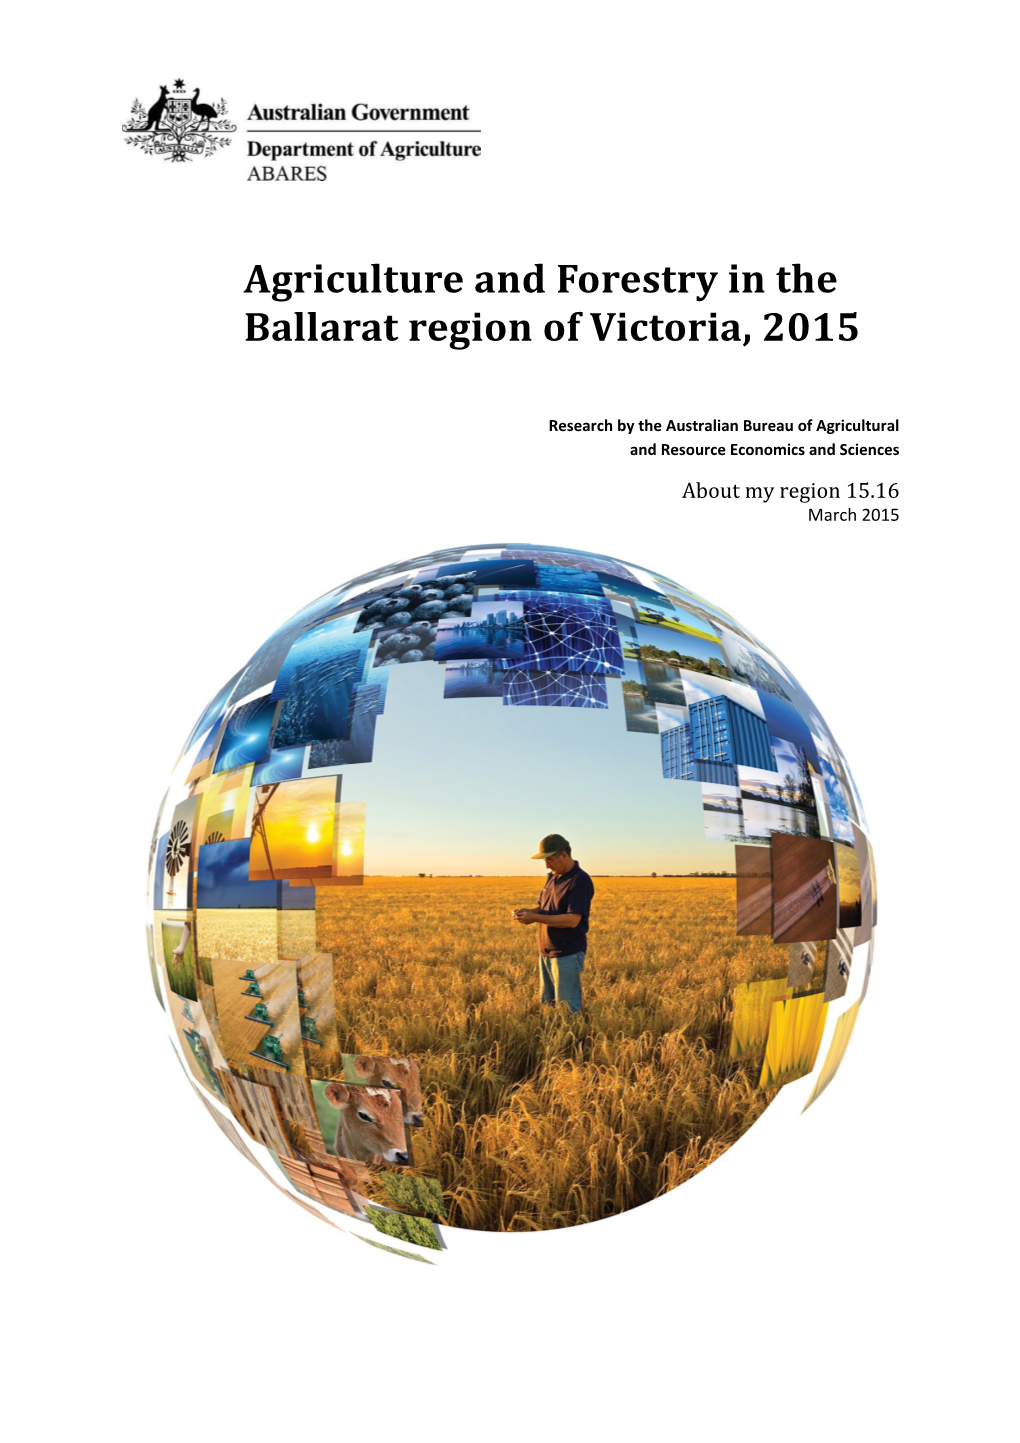 Agriculture and Forestry in the Ballarat Region of Victoria, 2015